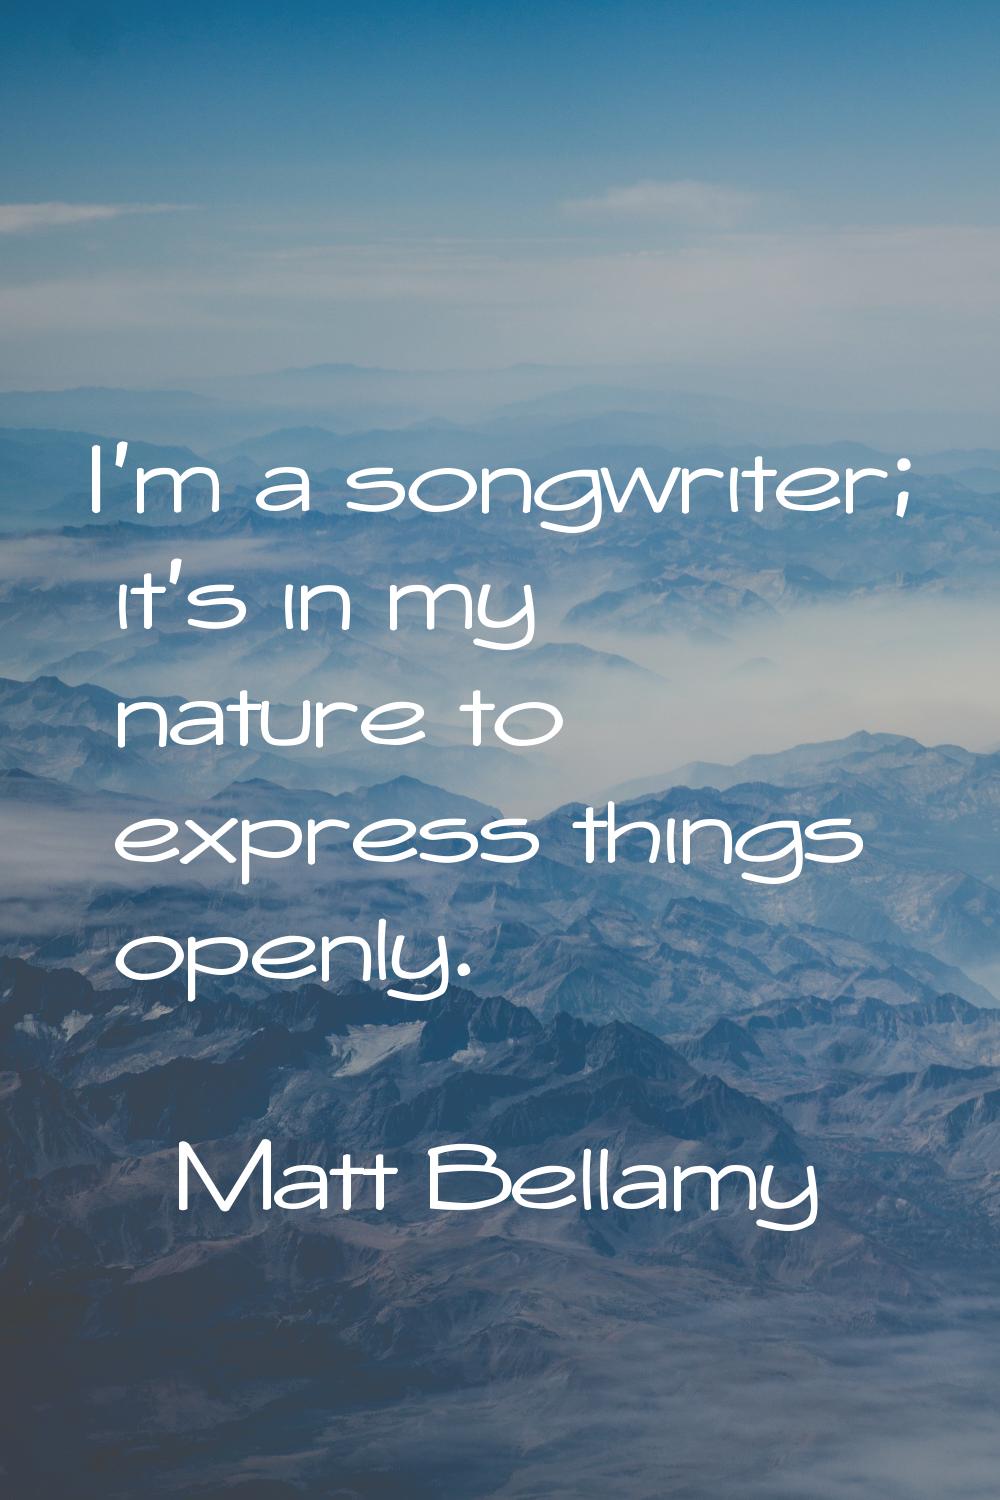 I'm a songwriter; it's in my nature to express things openly.